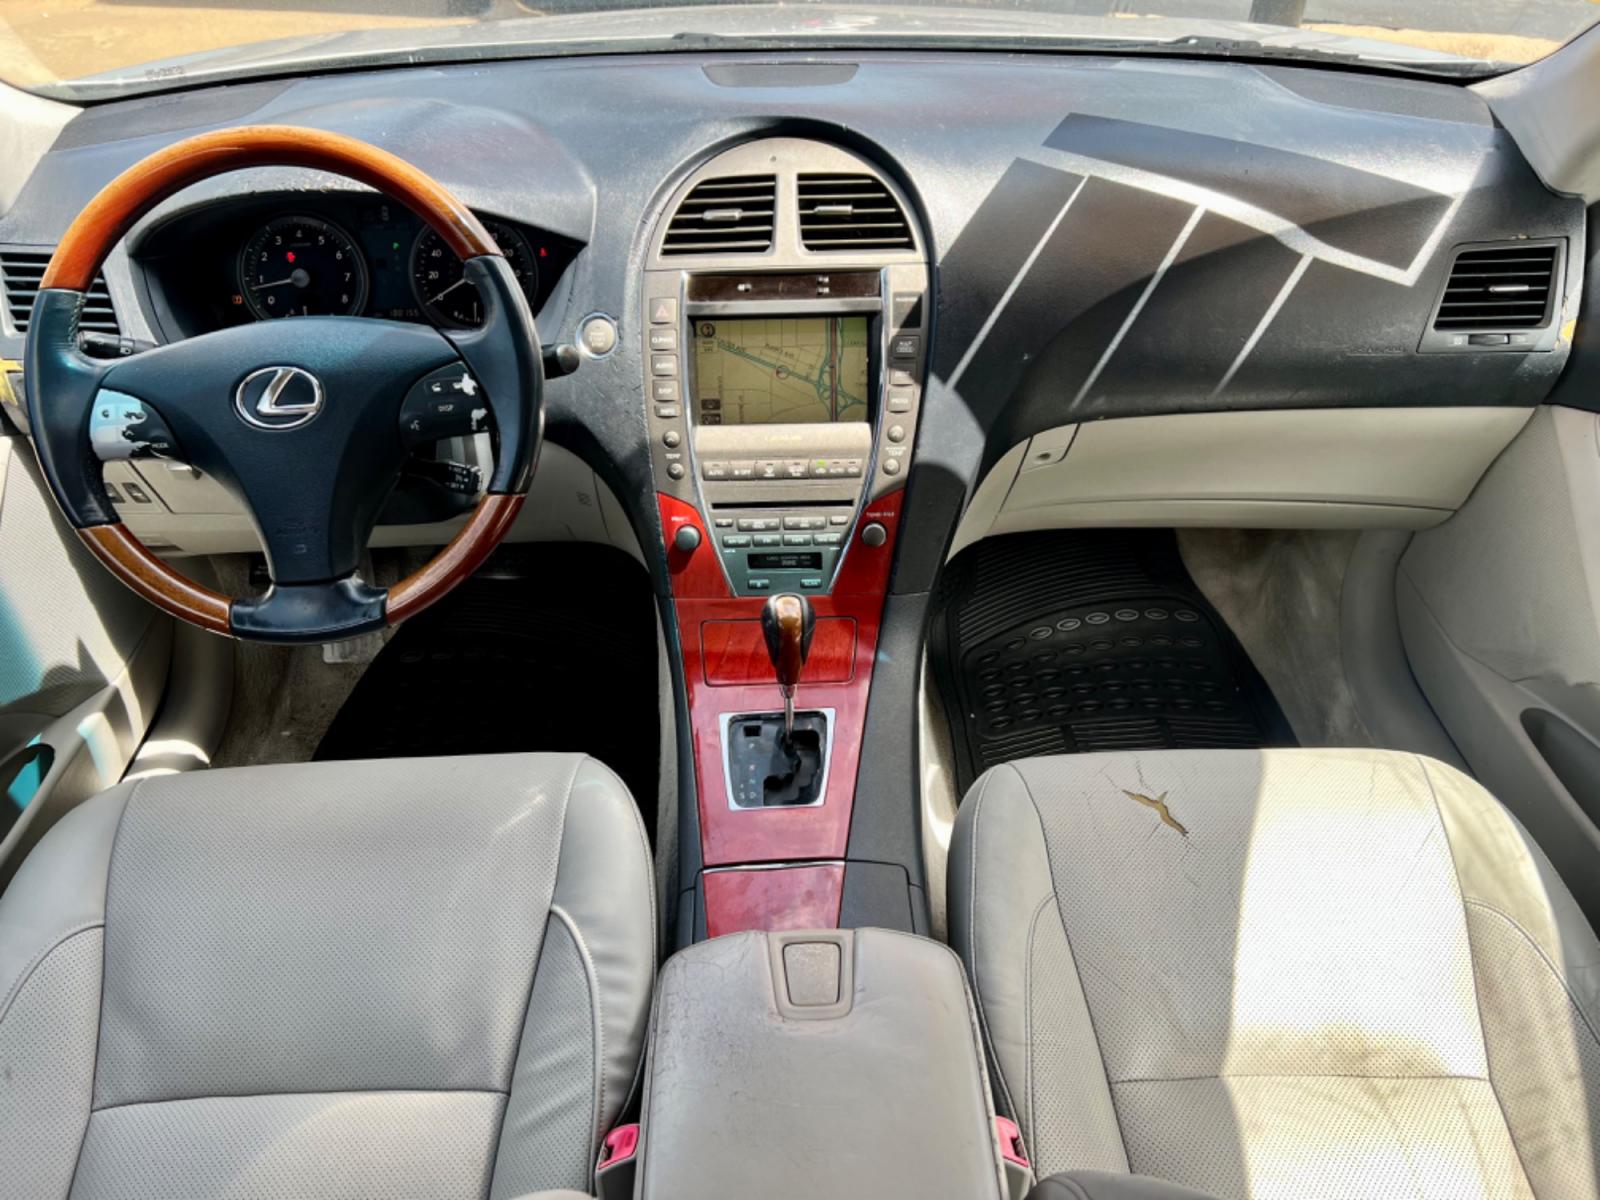 2007 SILVER LEXUS ES 350 BASE (JTHBJ46G072) , located at 5900 E. Lancaster Ave., Fort Worth, TX, 76112, (817) 457-5456, 0.000000, 0.000000 - CASH CAR ONLY, NO FINANCING AVAILABLE. THIS 2007 LEXUS ES 350 BASE 4 DOOR SEDAN RUNS AND DRIVES GREAT. IT IS EQUIPPED WITH A CD PLAYER, AM/FM RADIO AND AN AUX PORT. THE TIRES ARE IN GOOD CONDITION AND STILL HAVE TREAD LEFT ON THEM. THIS CAR WILL NOT LAST SO ACT FAST! Call or text Frances at 68 - Photo #18